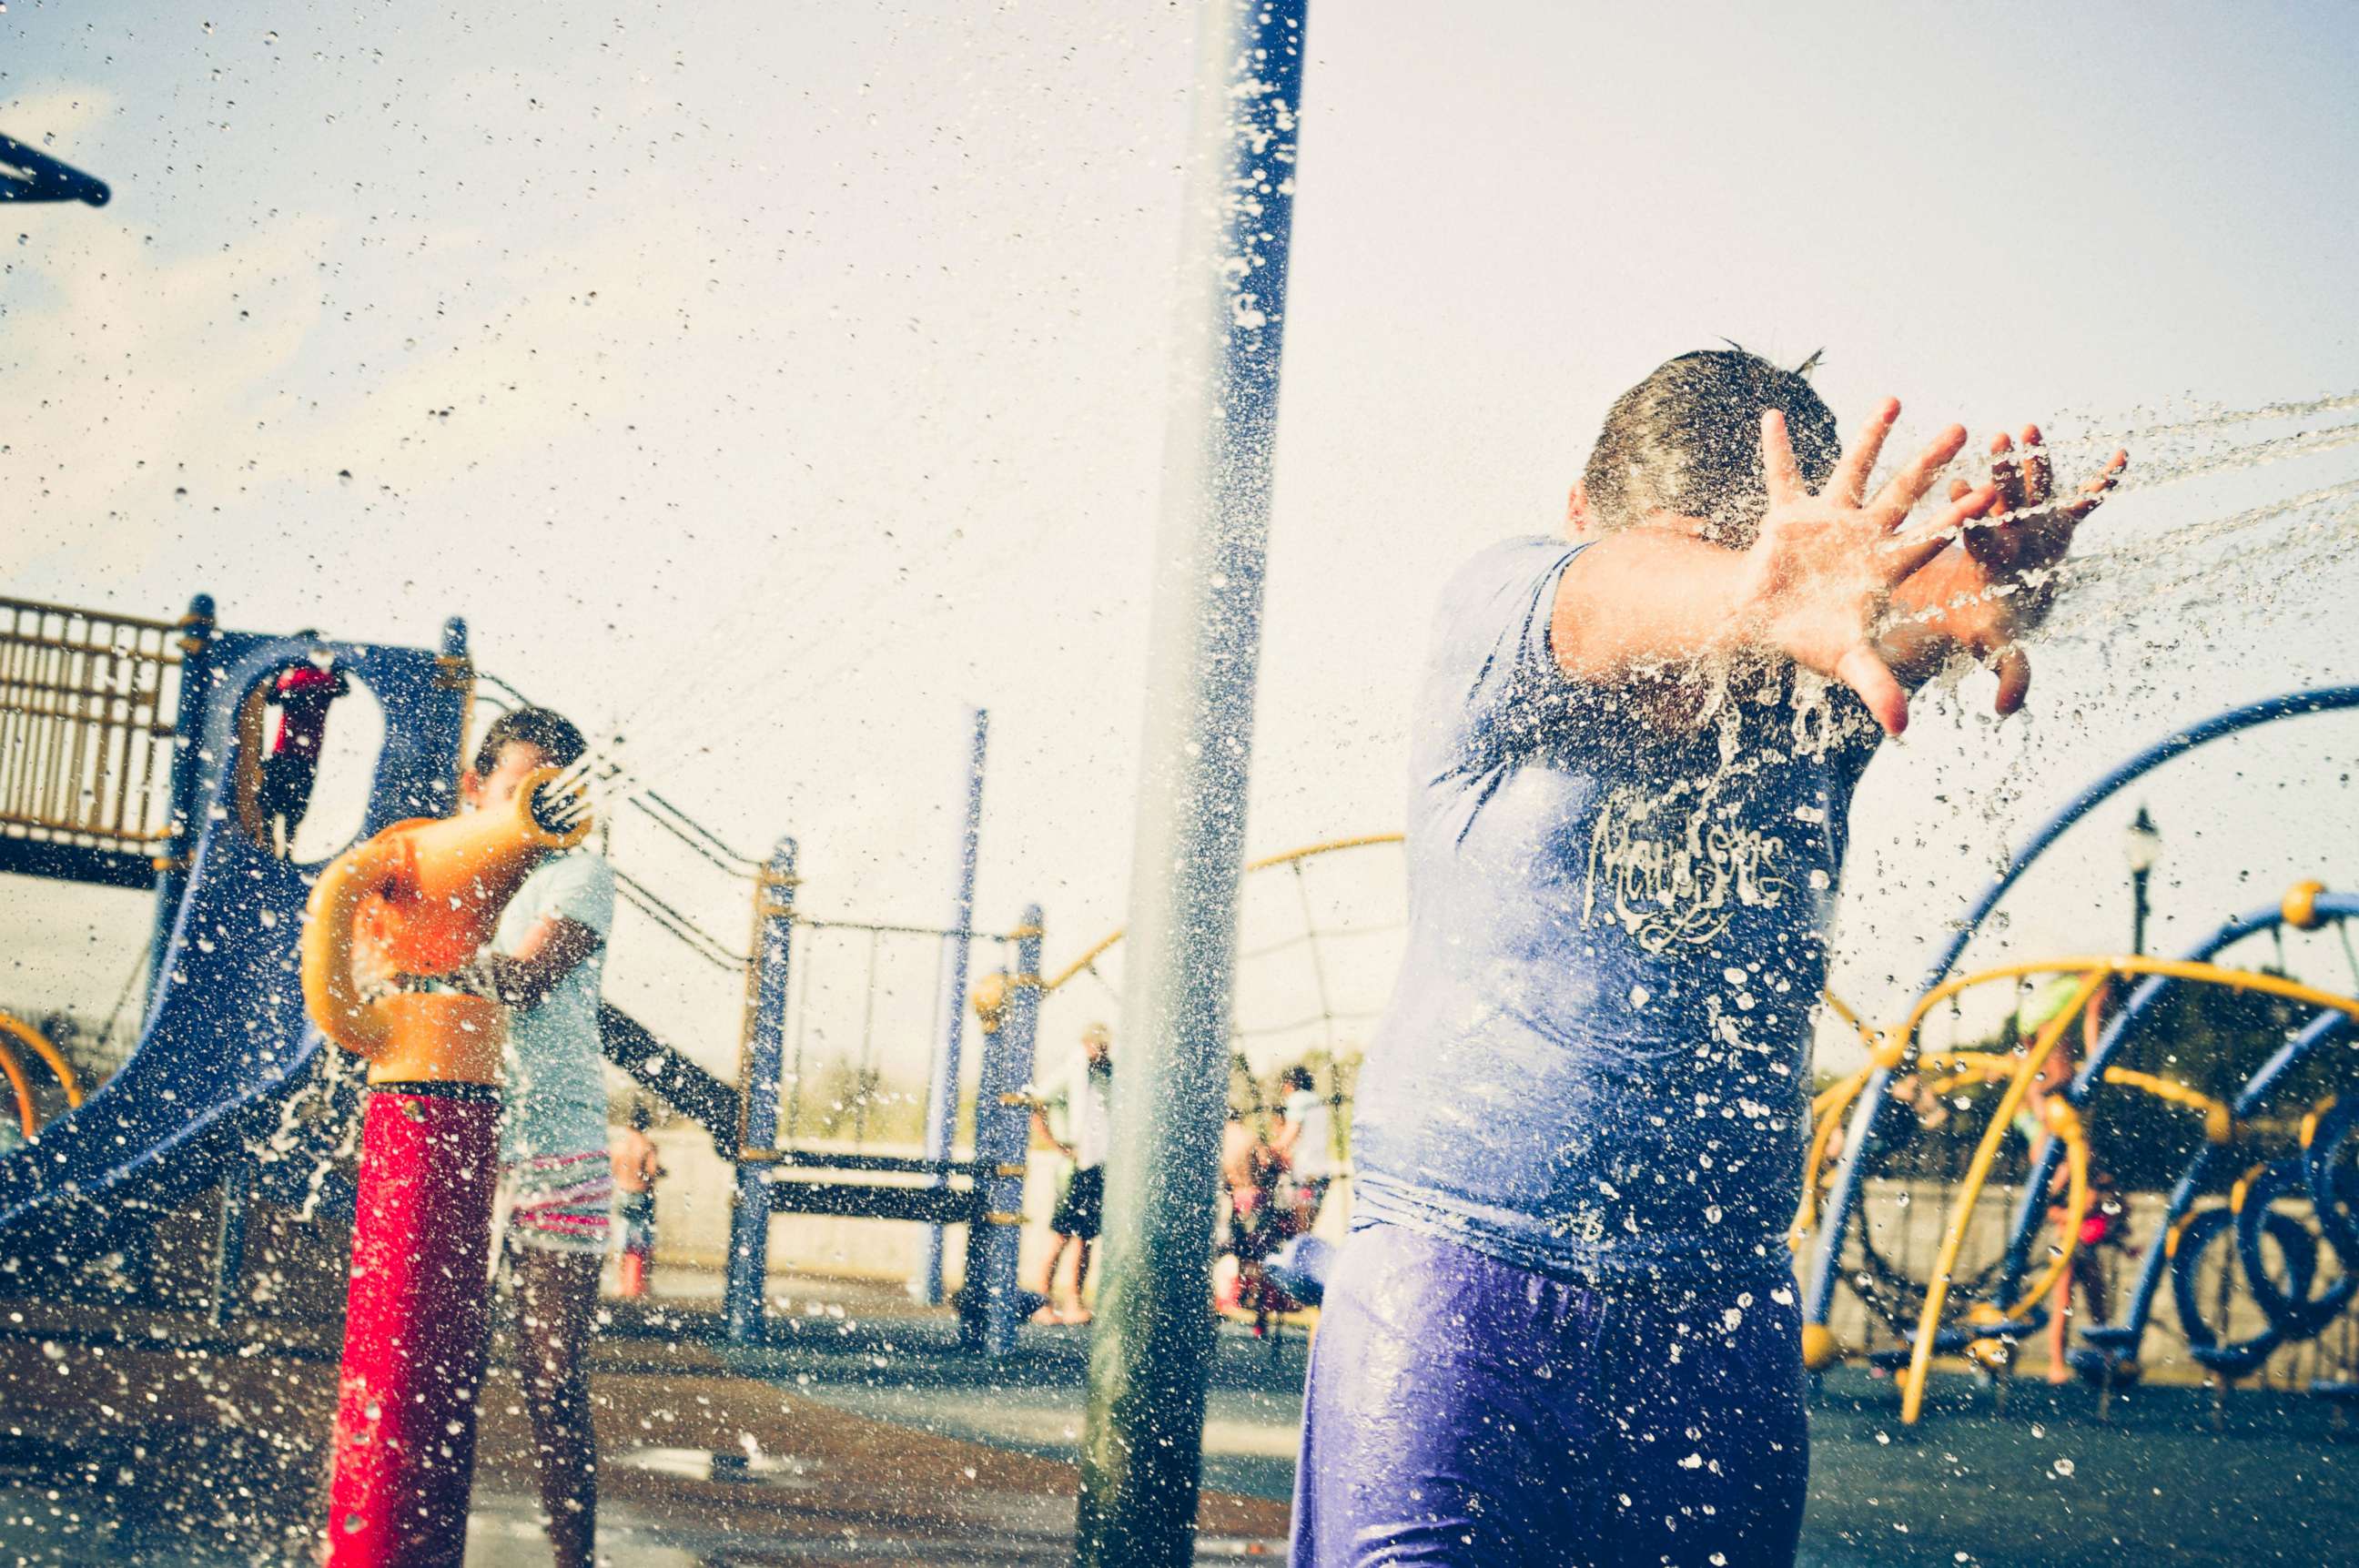 PHOTO: Children play a water playground in this stock photo.